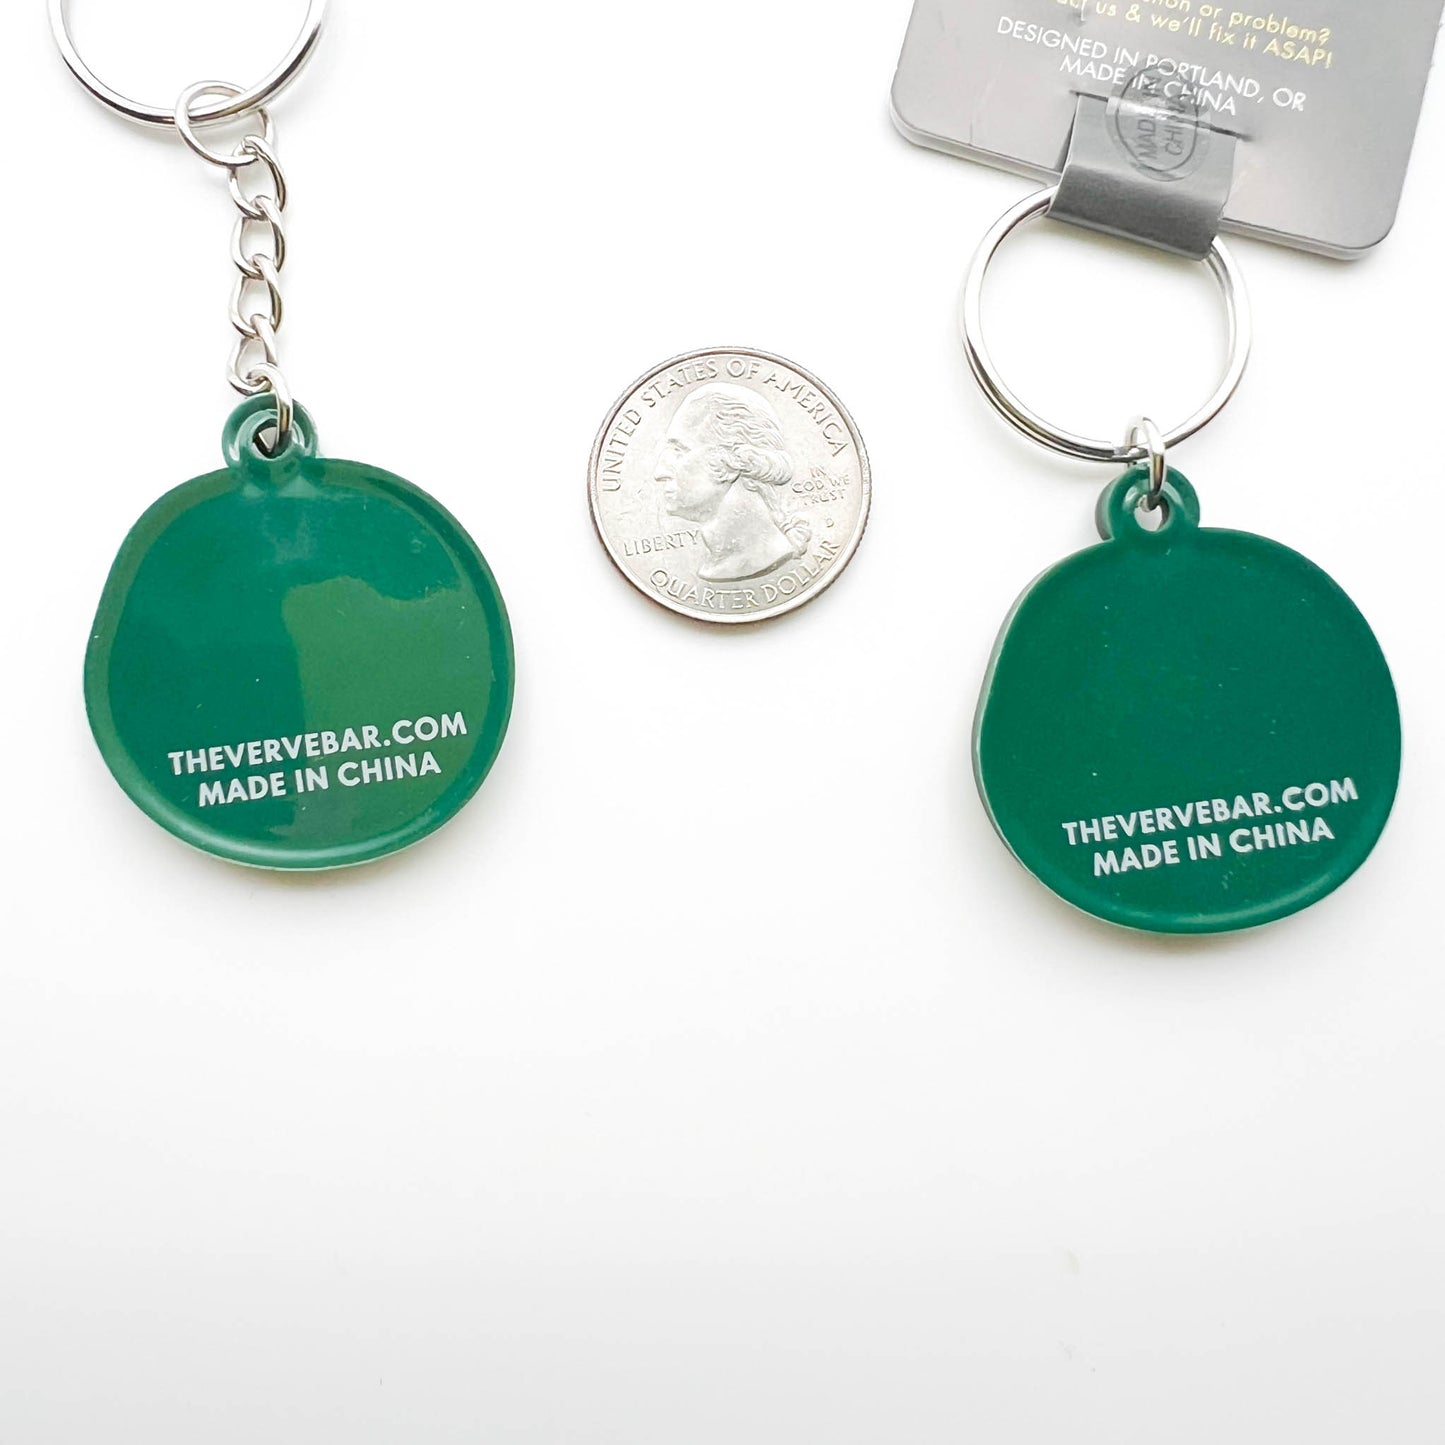 Funny Gag Gift Keychain - I Have the IQ of a Yam.